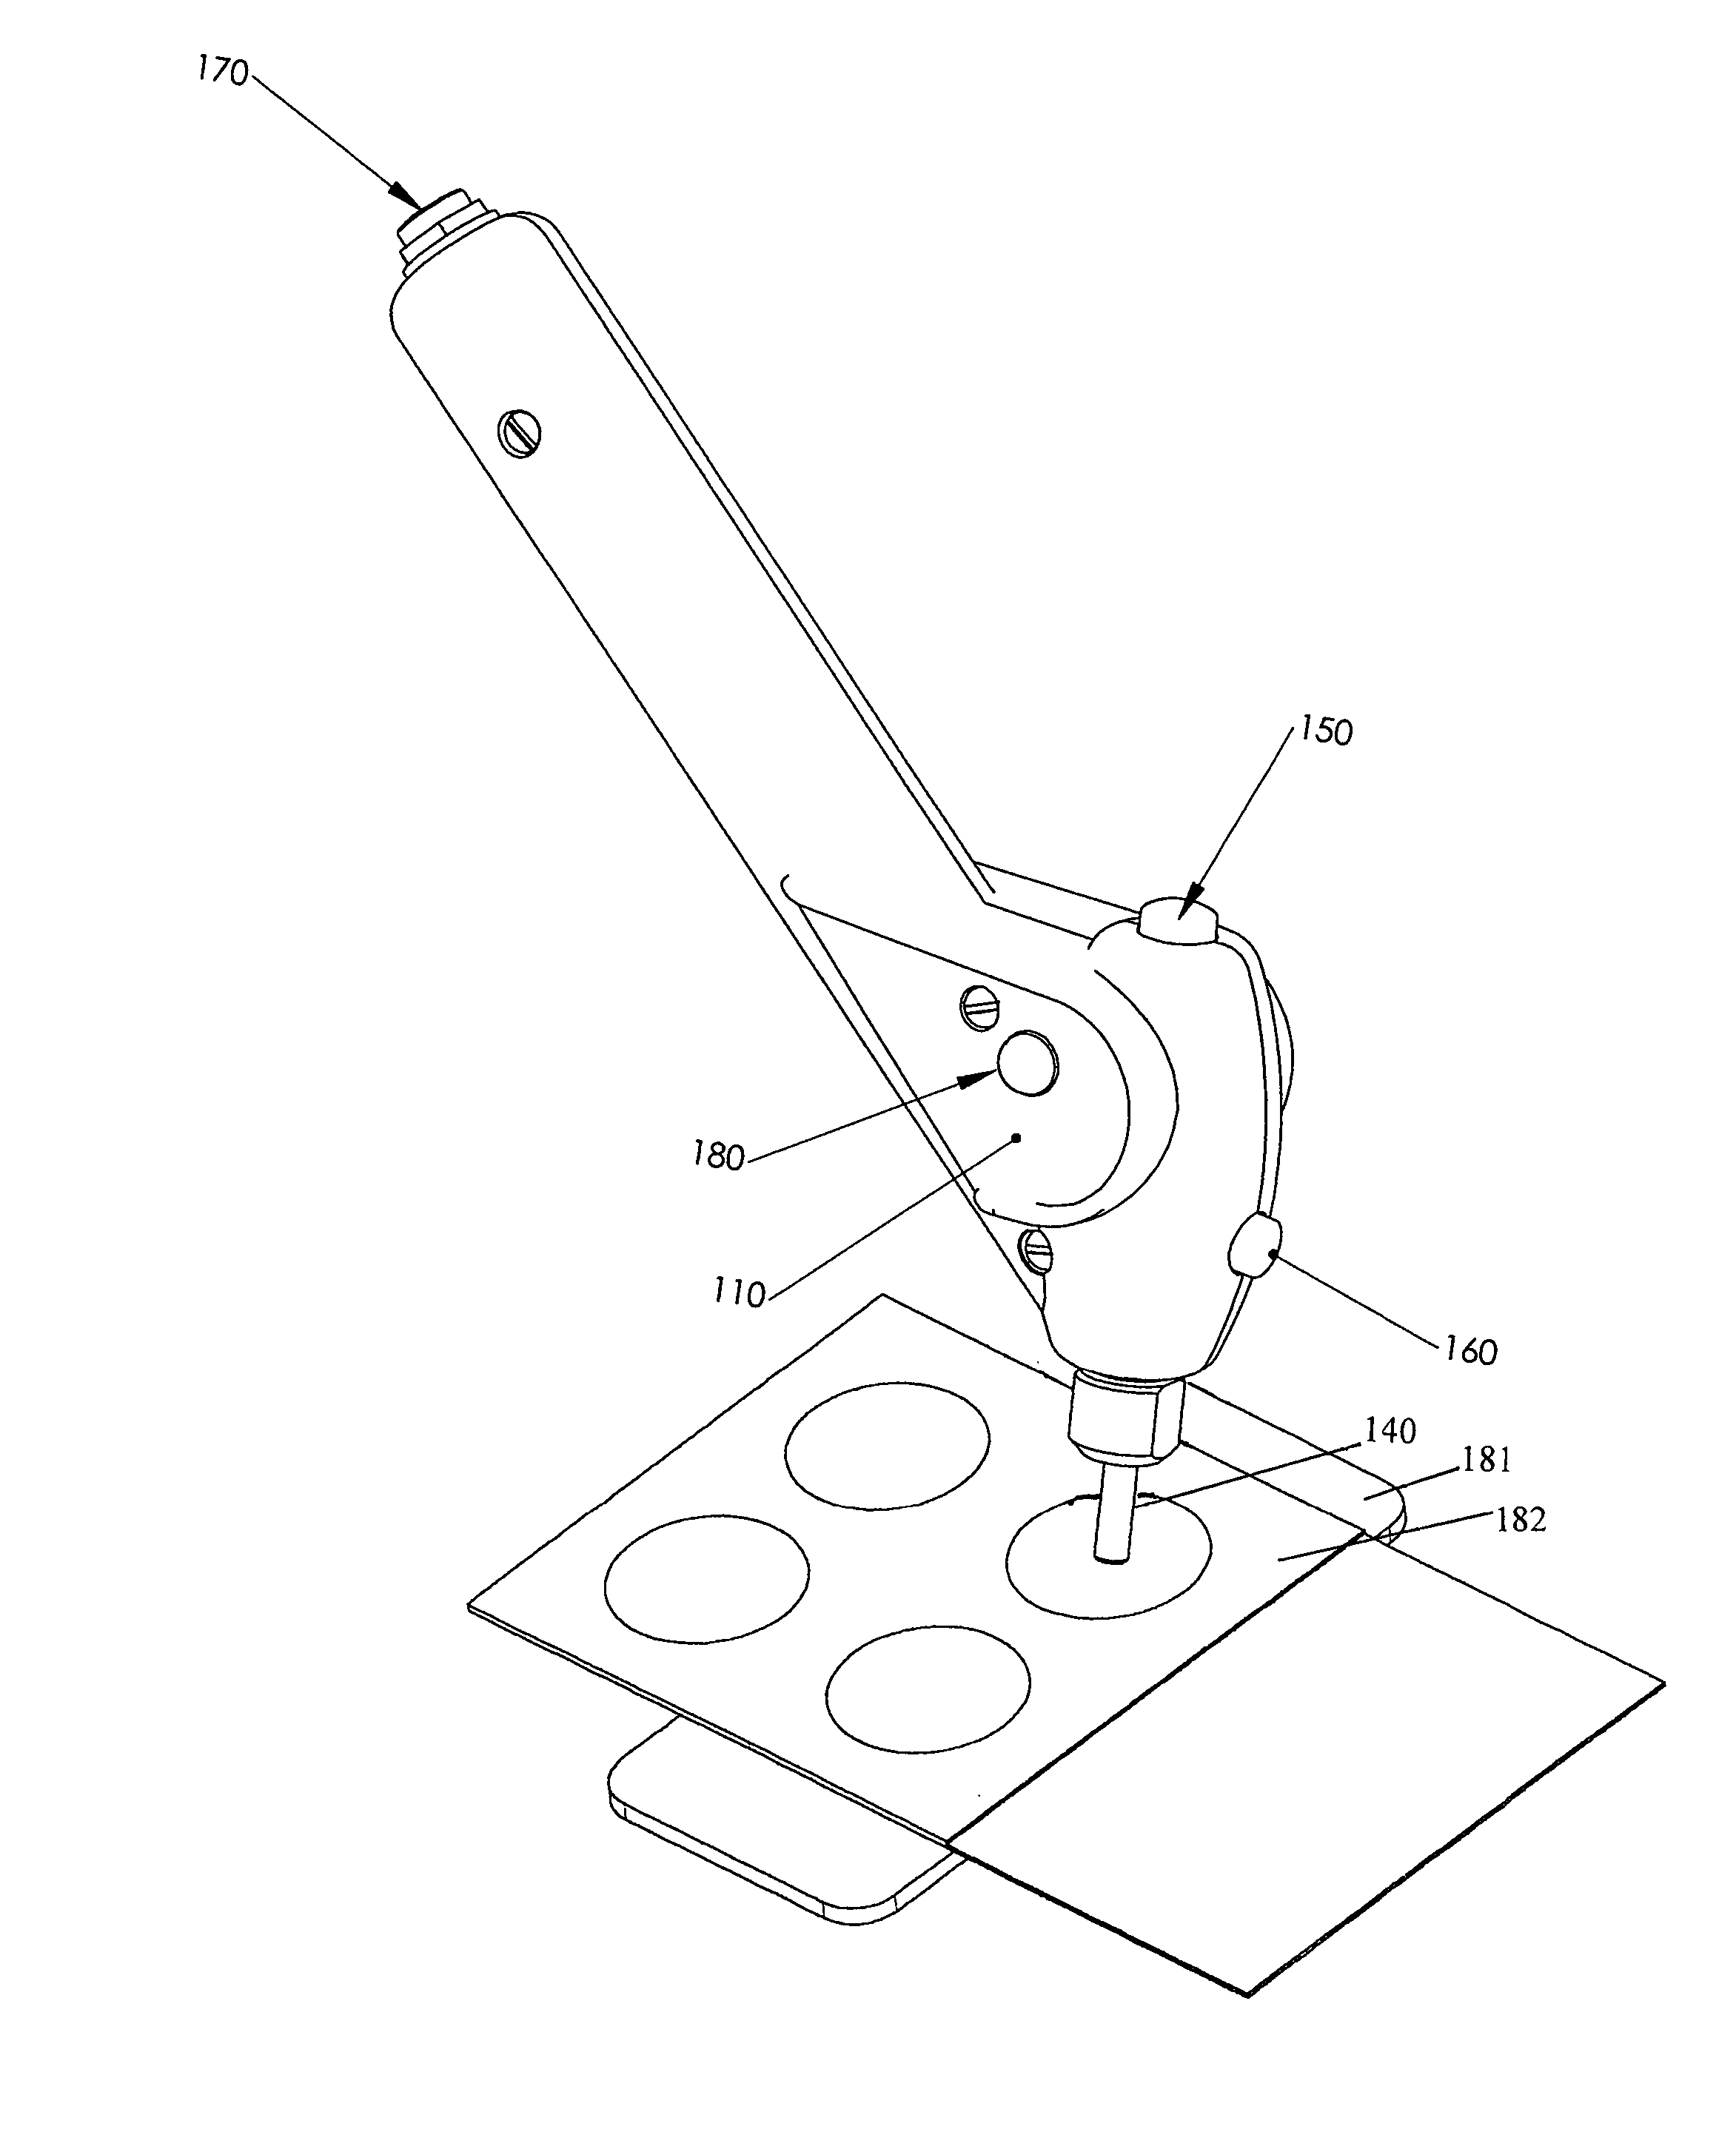 Motor driven sampling apparatus for material collection